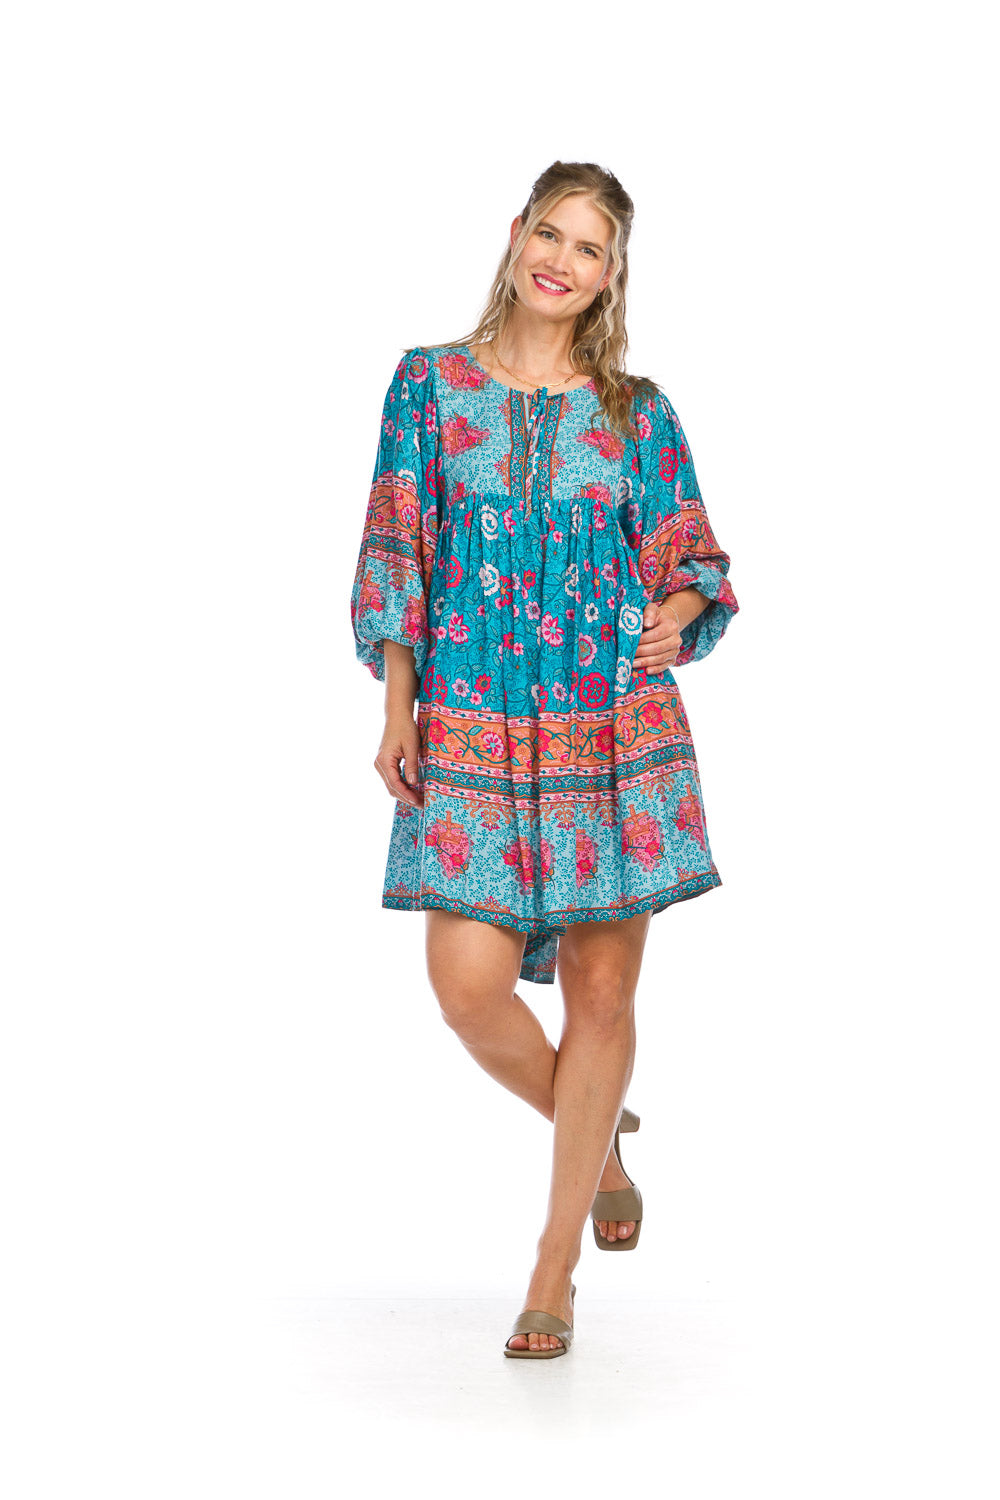 PD16668 TURQ Floral Boho Dress with Pockets